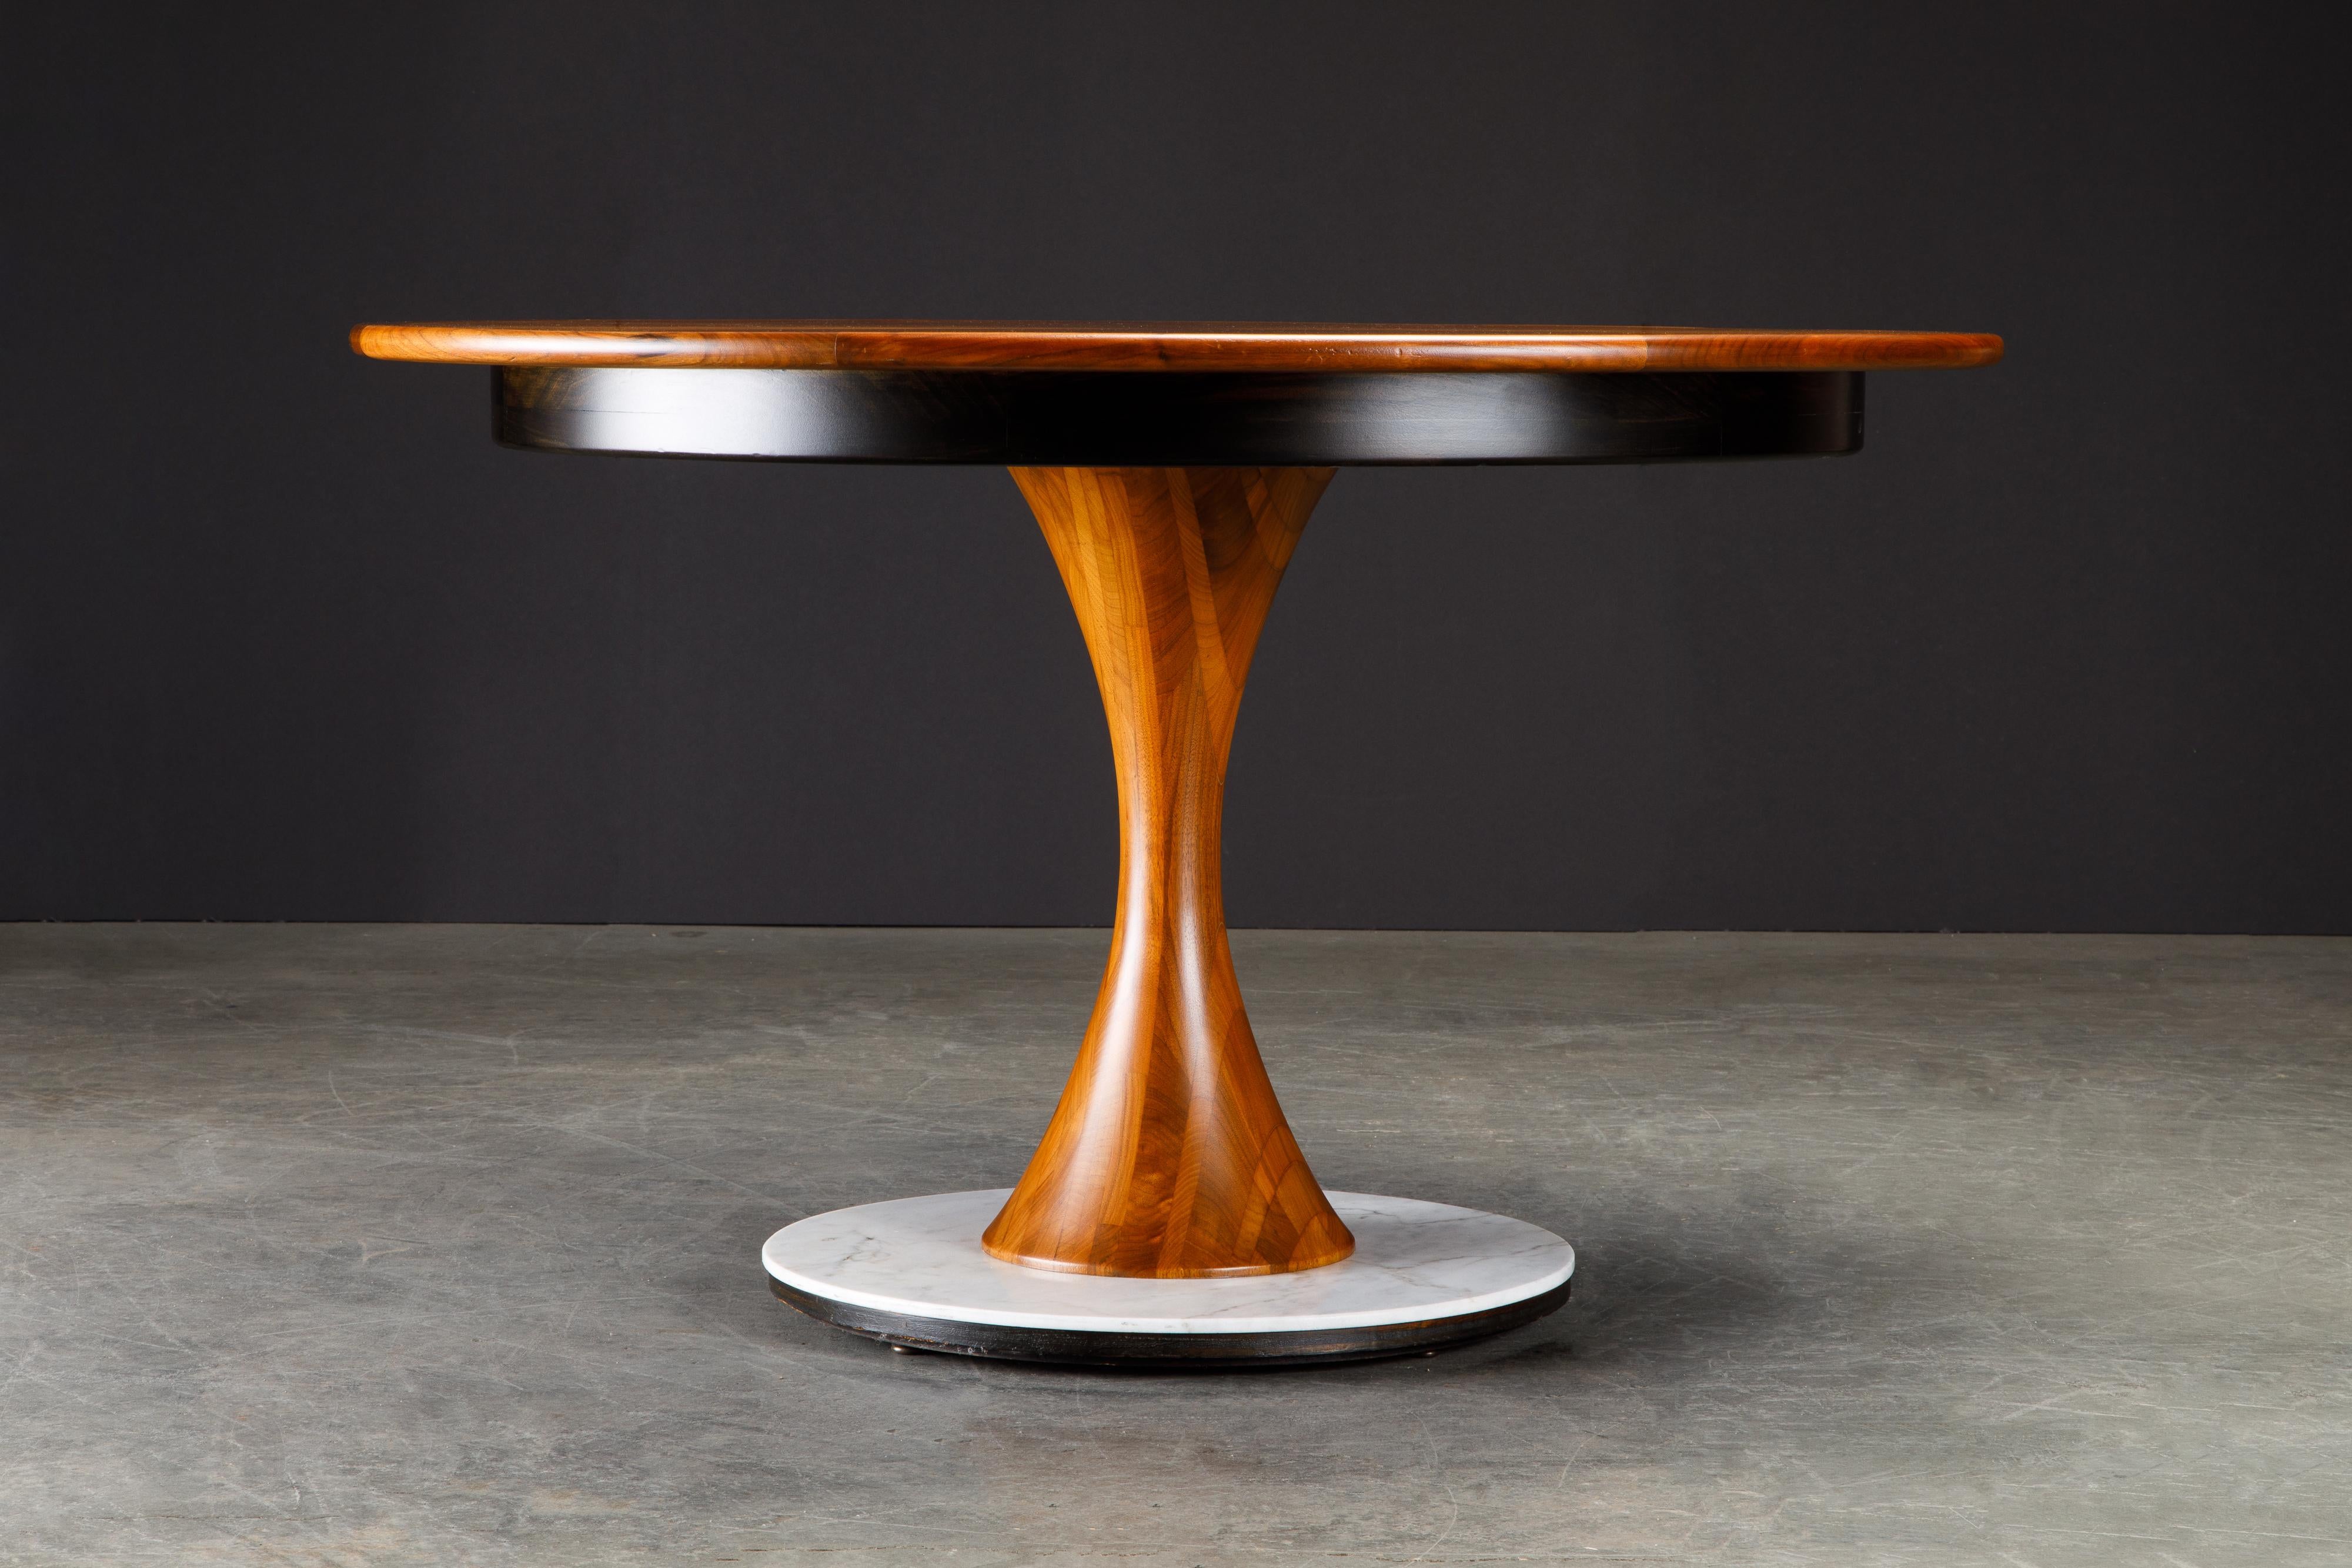 This gorgeous table, from the estate of Shari Lewis, is an exquisitely crafted custom craftsman pedestal dining table by Phillip Lloyd Powell, 1970s, sculpted from walnut, marble and ebonized wood. Signed underneath on two sections of the table: